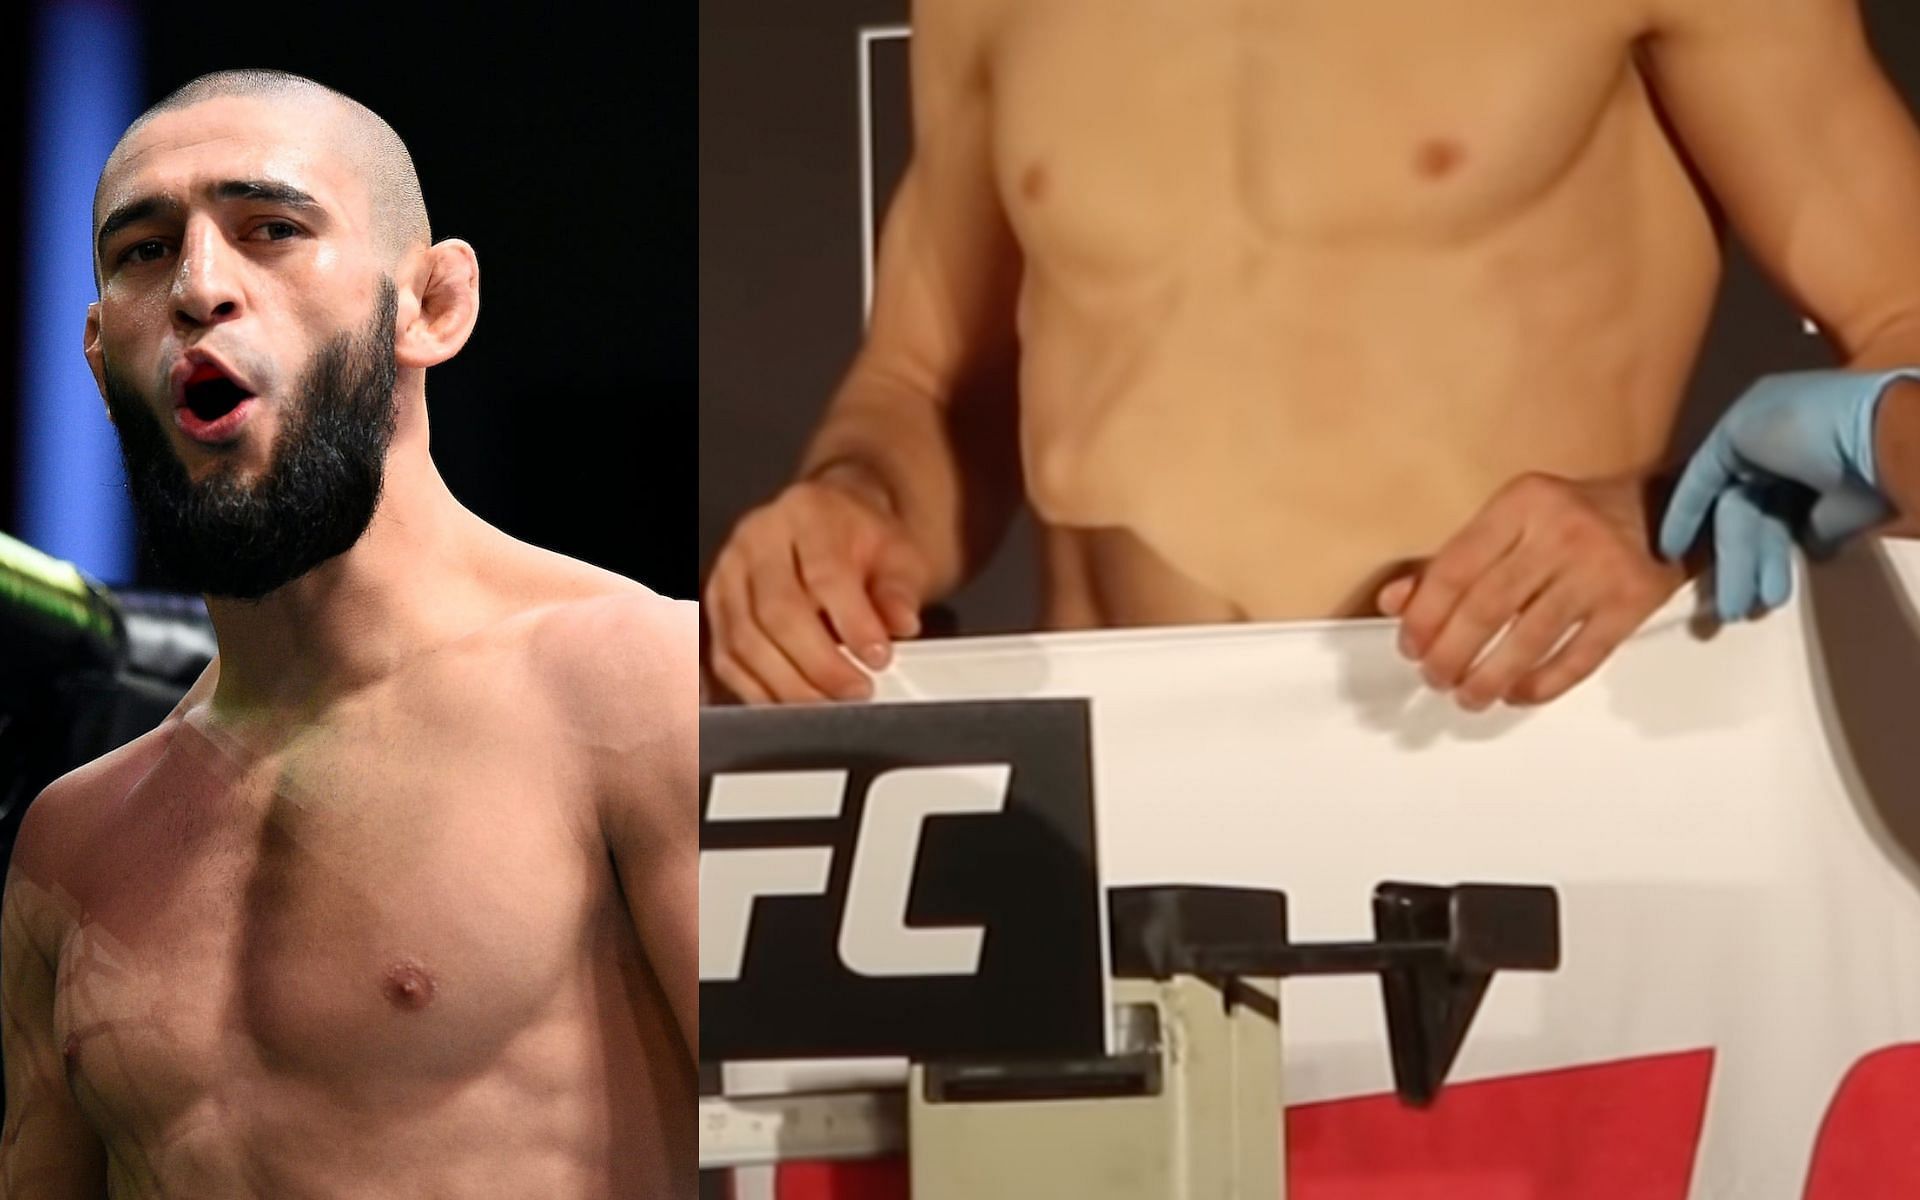 Khamzat Chimaev was sighted resting his hands on the towel to make weight at UFC 267 weigh-ins